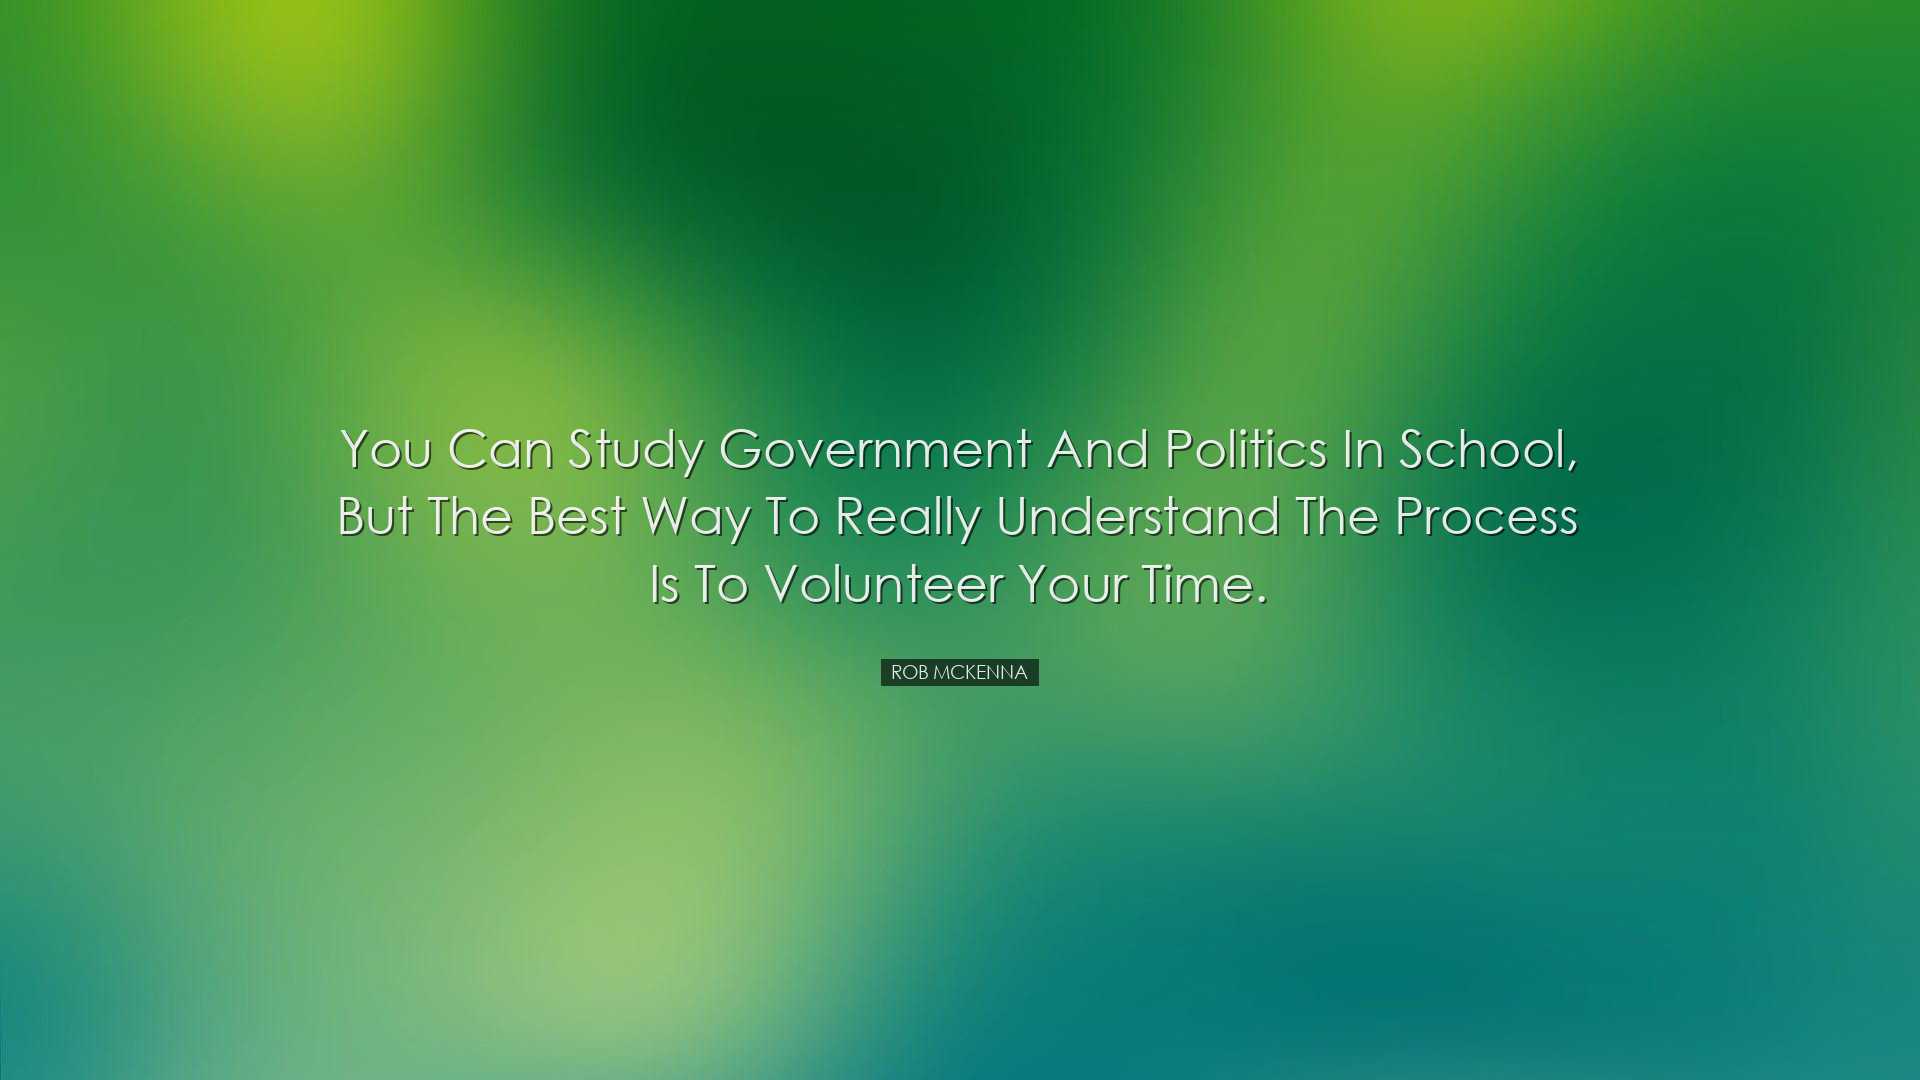 You can study government and politics in school, but the best way